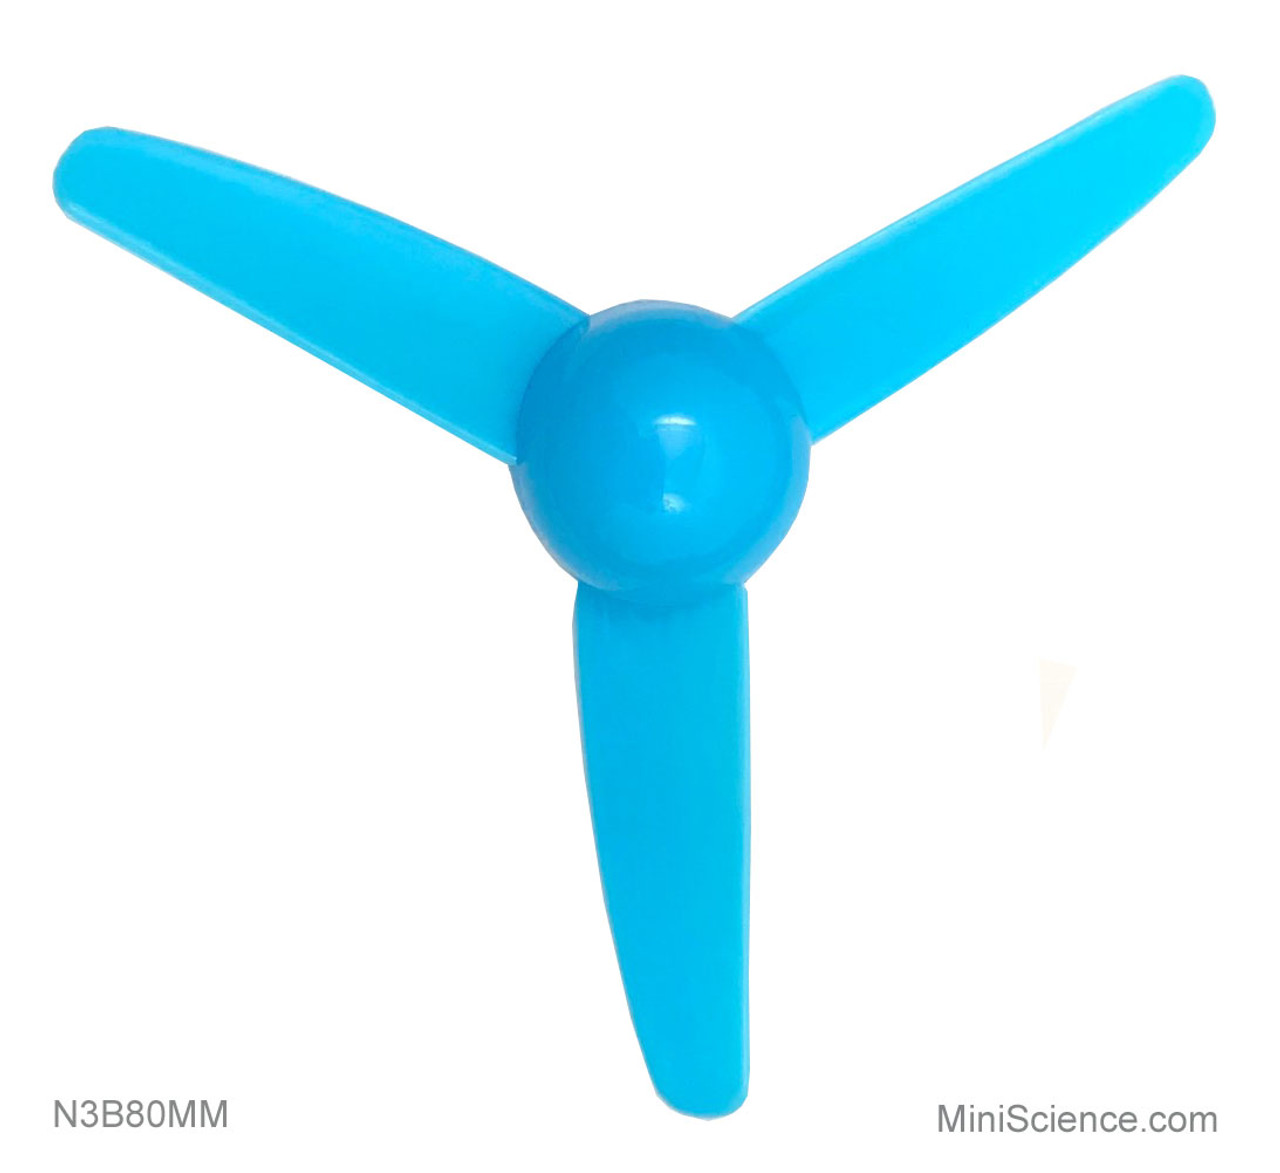 80-mm plastic propeller with 3 narrow blades and 2-mm bore for high speed motors.